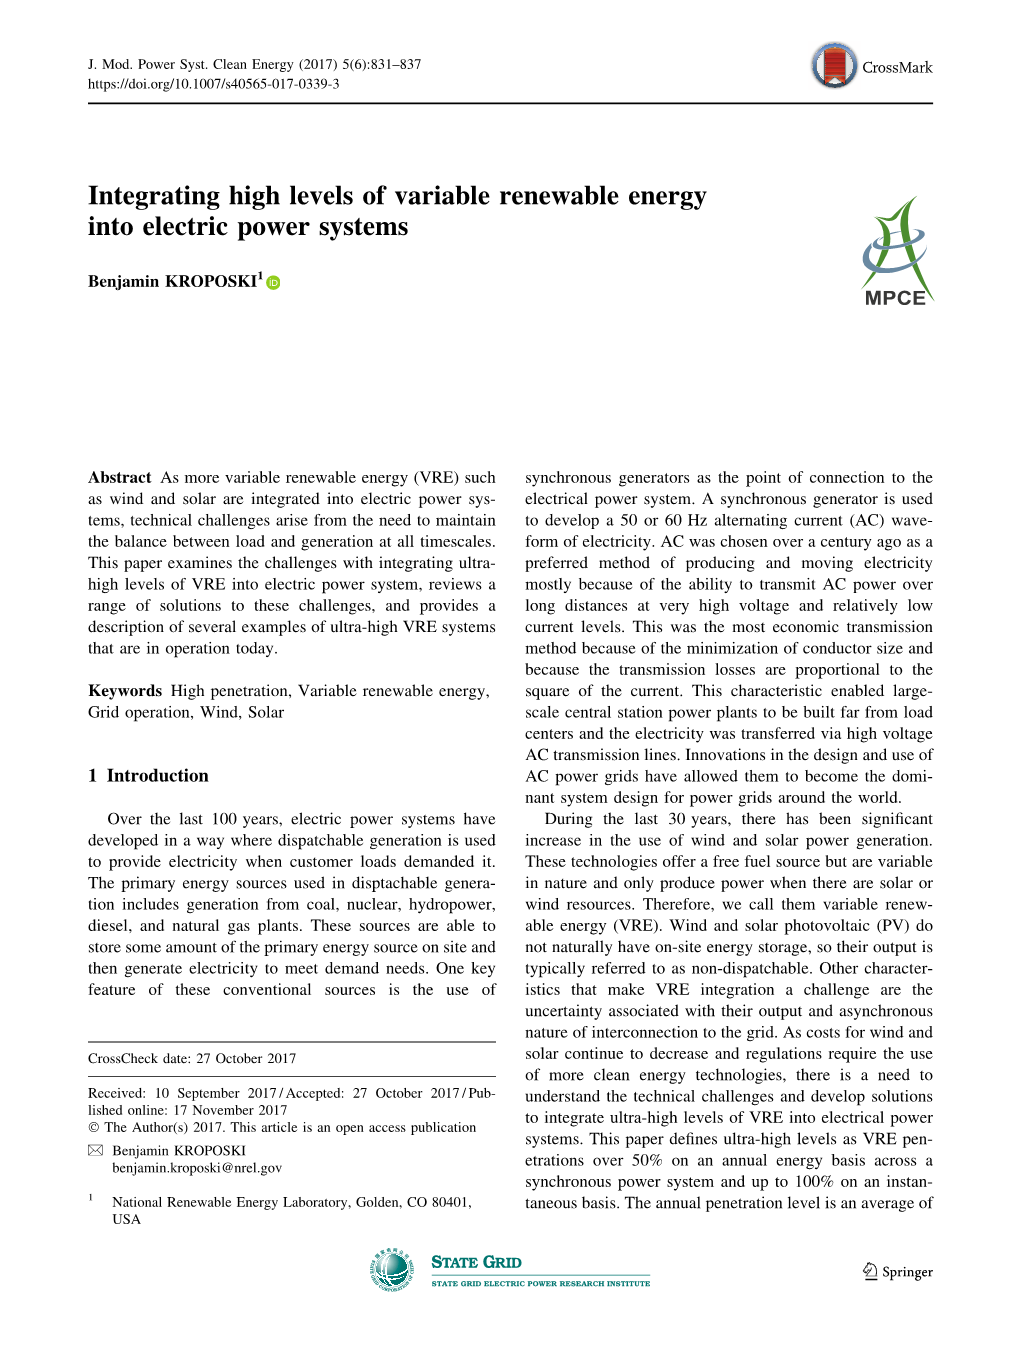 Integrating High Levels of Variable Renewable Energy Into Electric Power Systems